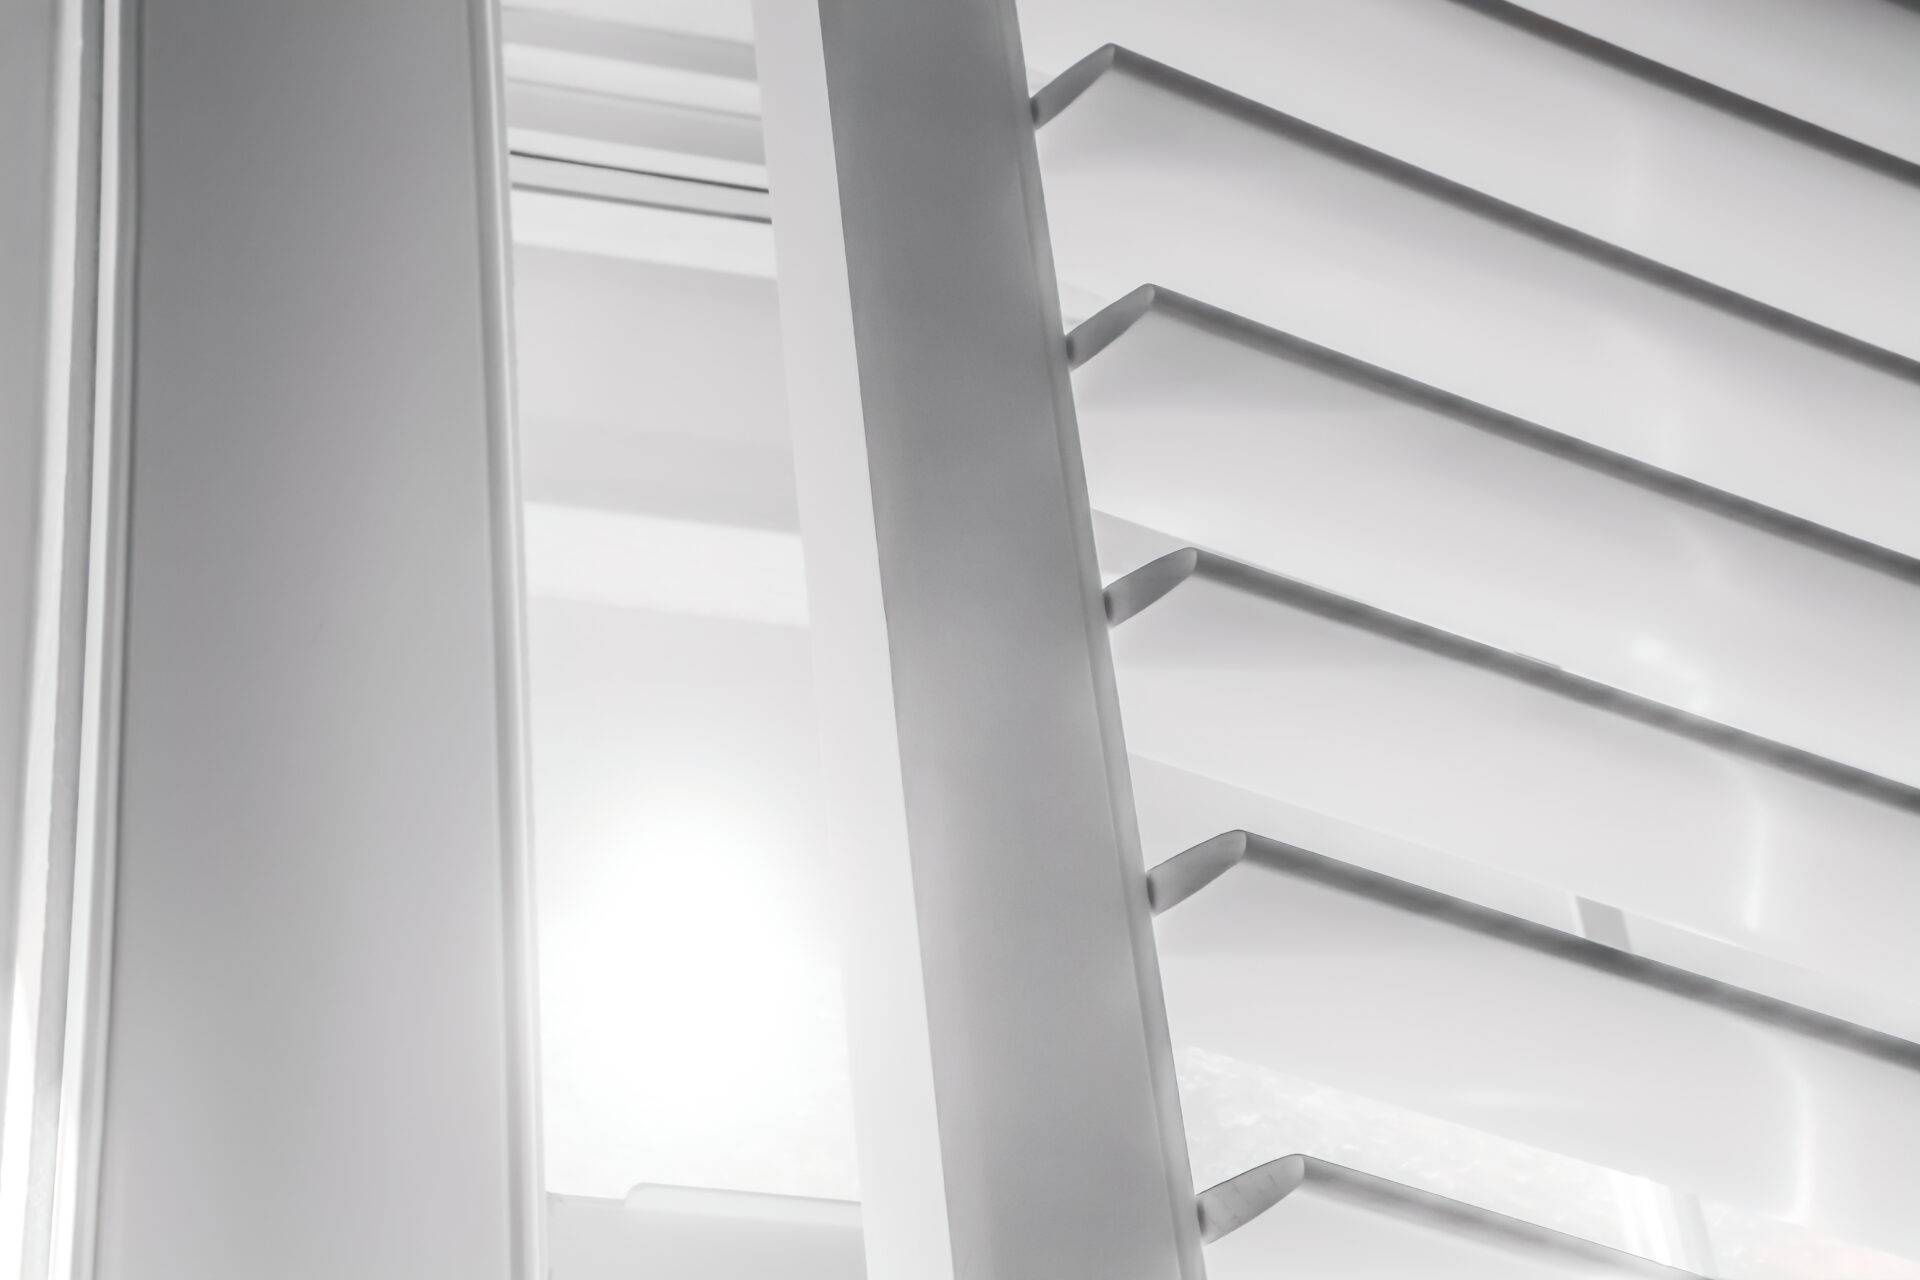 White California Window Shutter with bright light streaming through slats. Wholesale Blind Factory